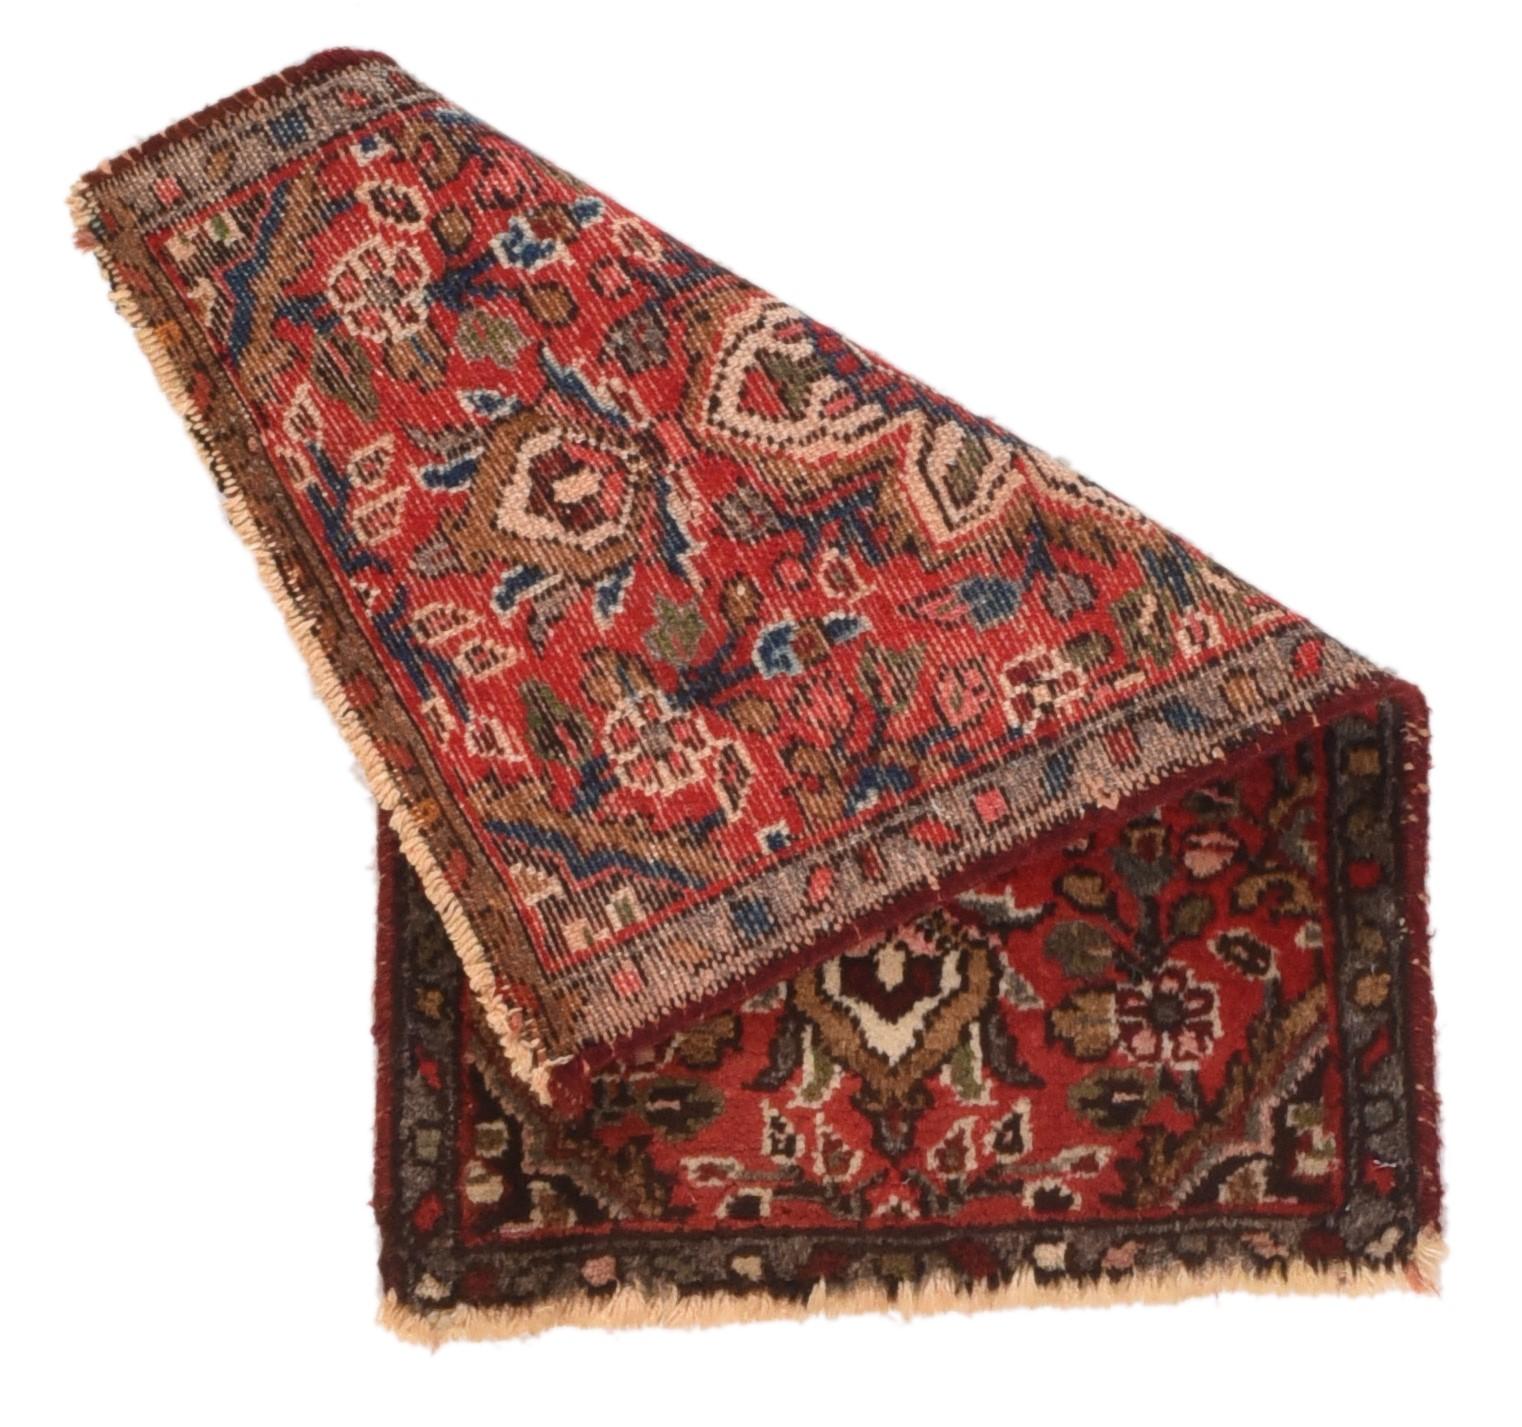 Vintage Hamedan Rug 1'5'' x 2'. Red field with a large ivory octofoil medallion against floral sprays. Narrow medium blue border. Ends need securing, fairly good condition. Moderate/coarse weave on cotton.